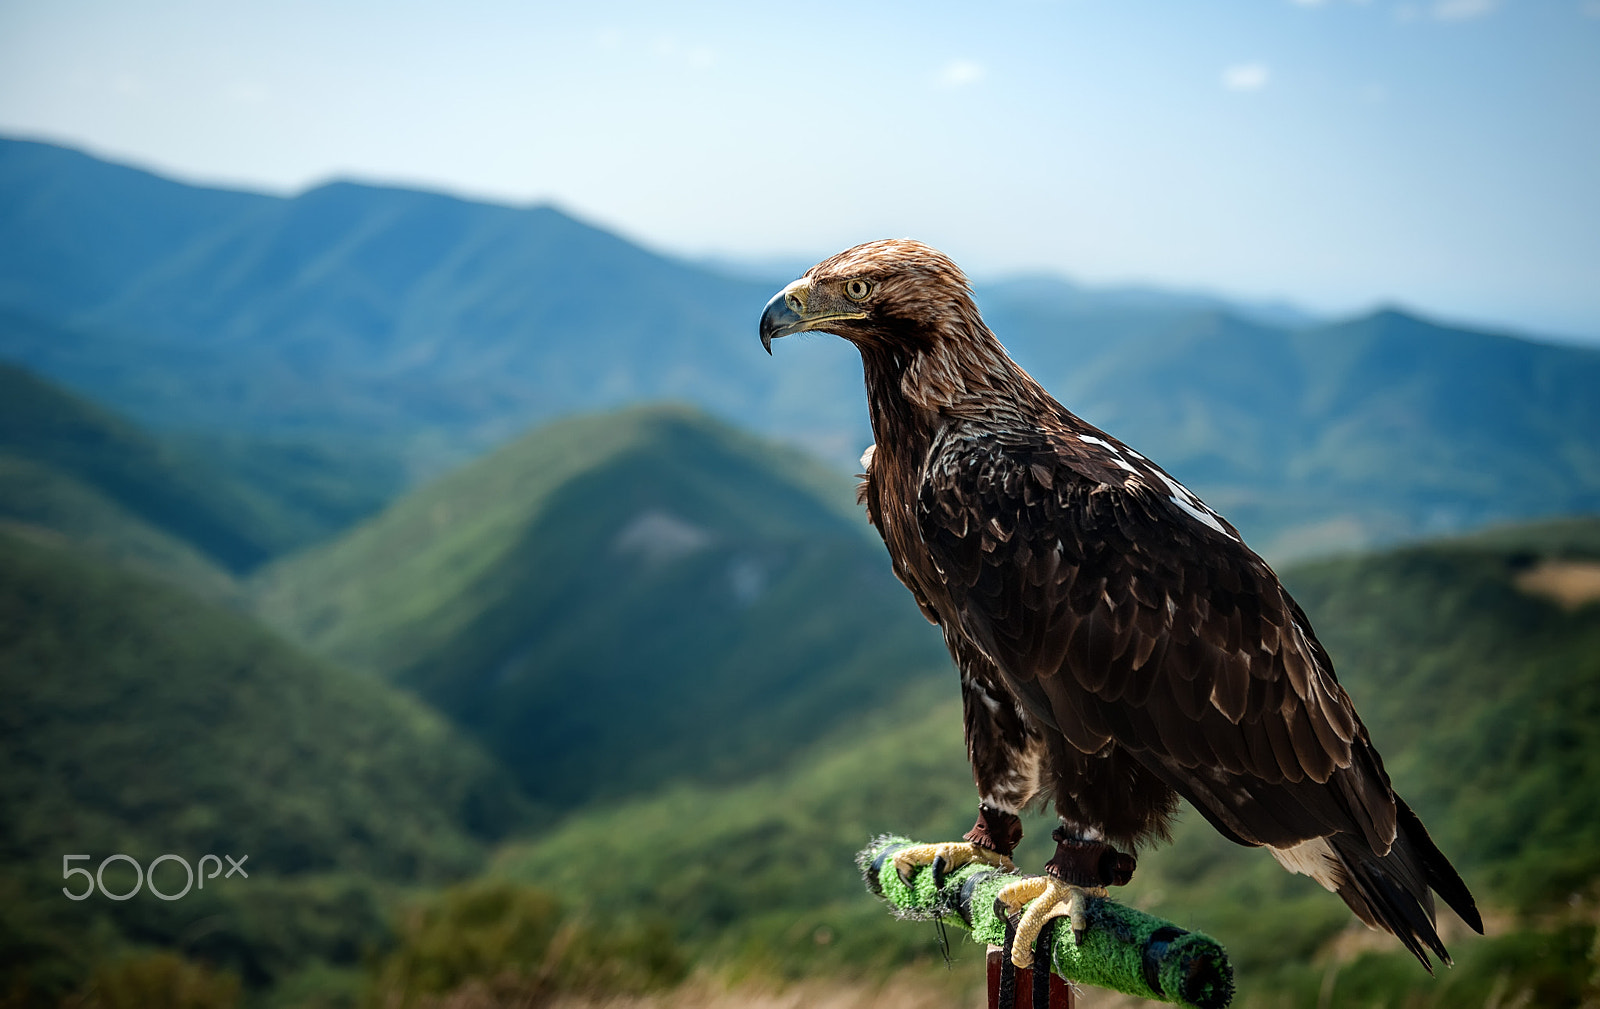 Nikon D700 sample photo. Eagle with a big beak closeup, sitting on poles in the landscape photography